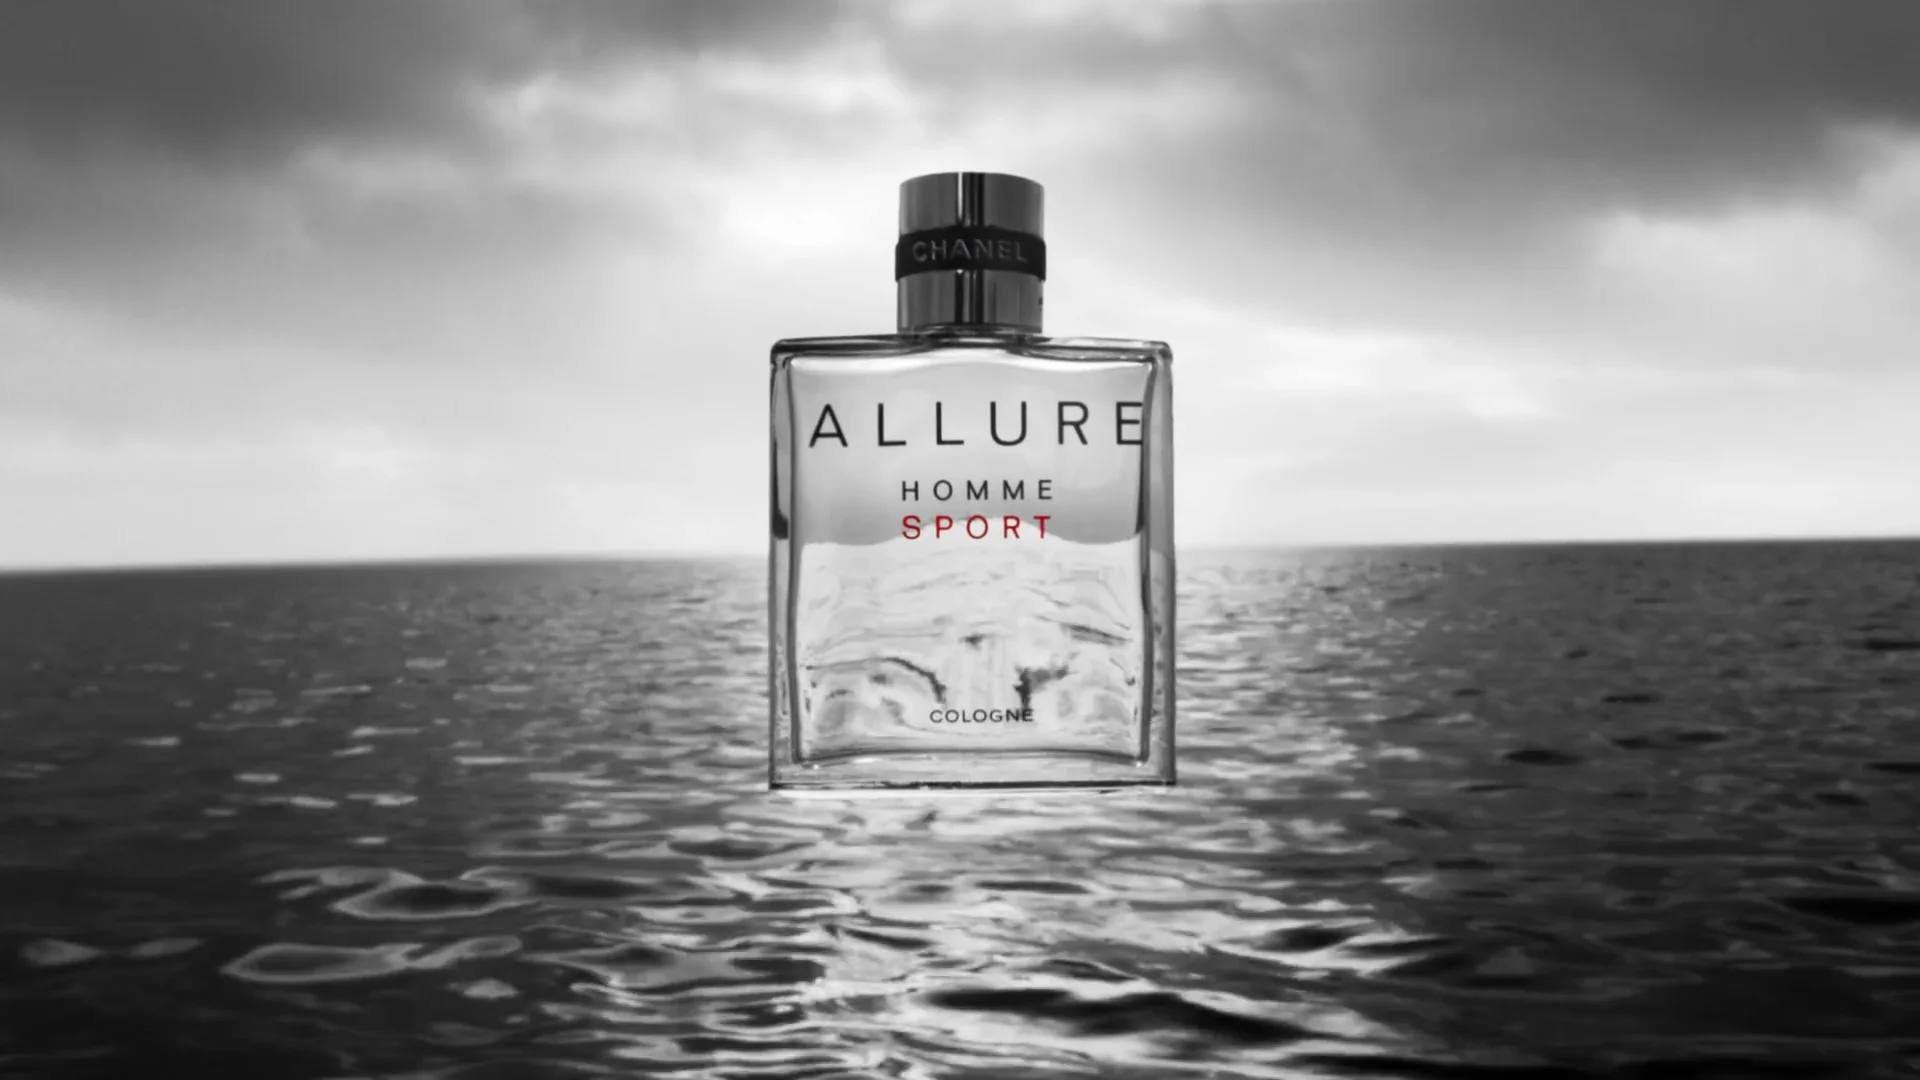 Chanel Allure Homme Sport - Cologne on Vimeo